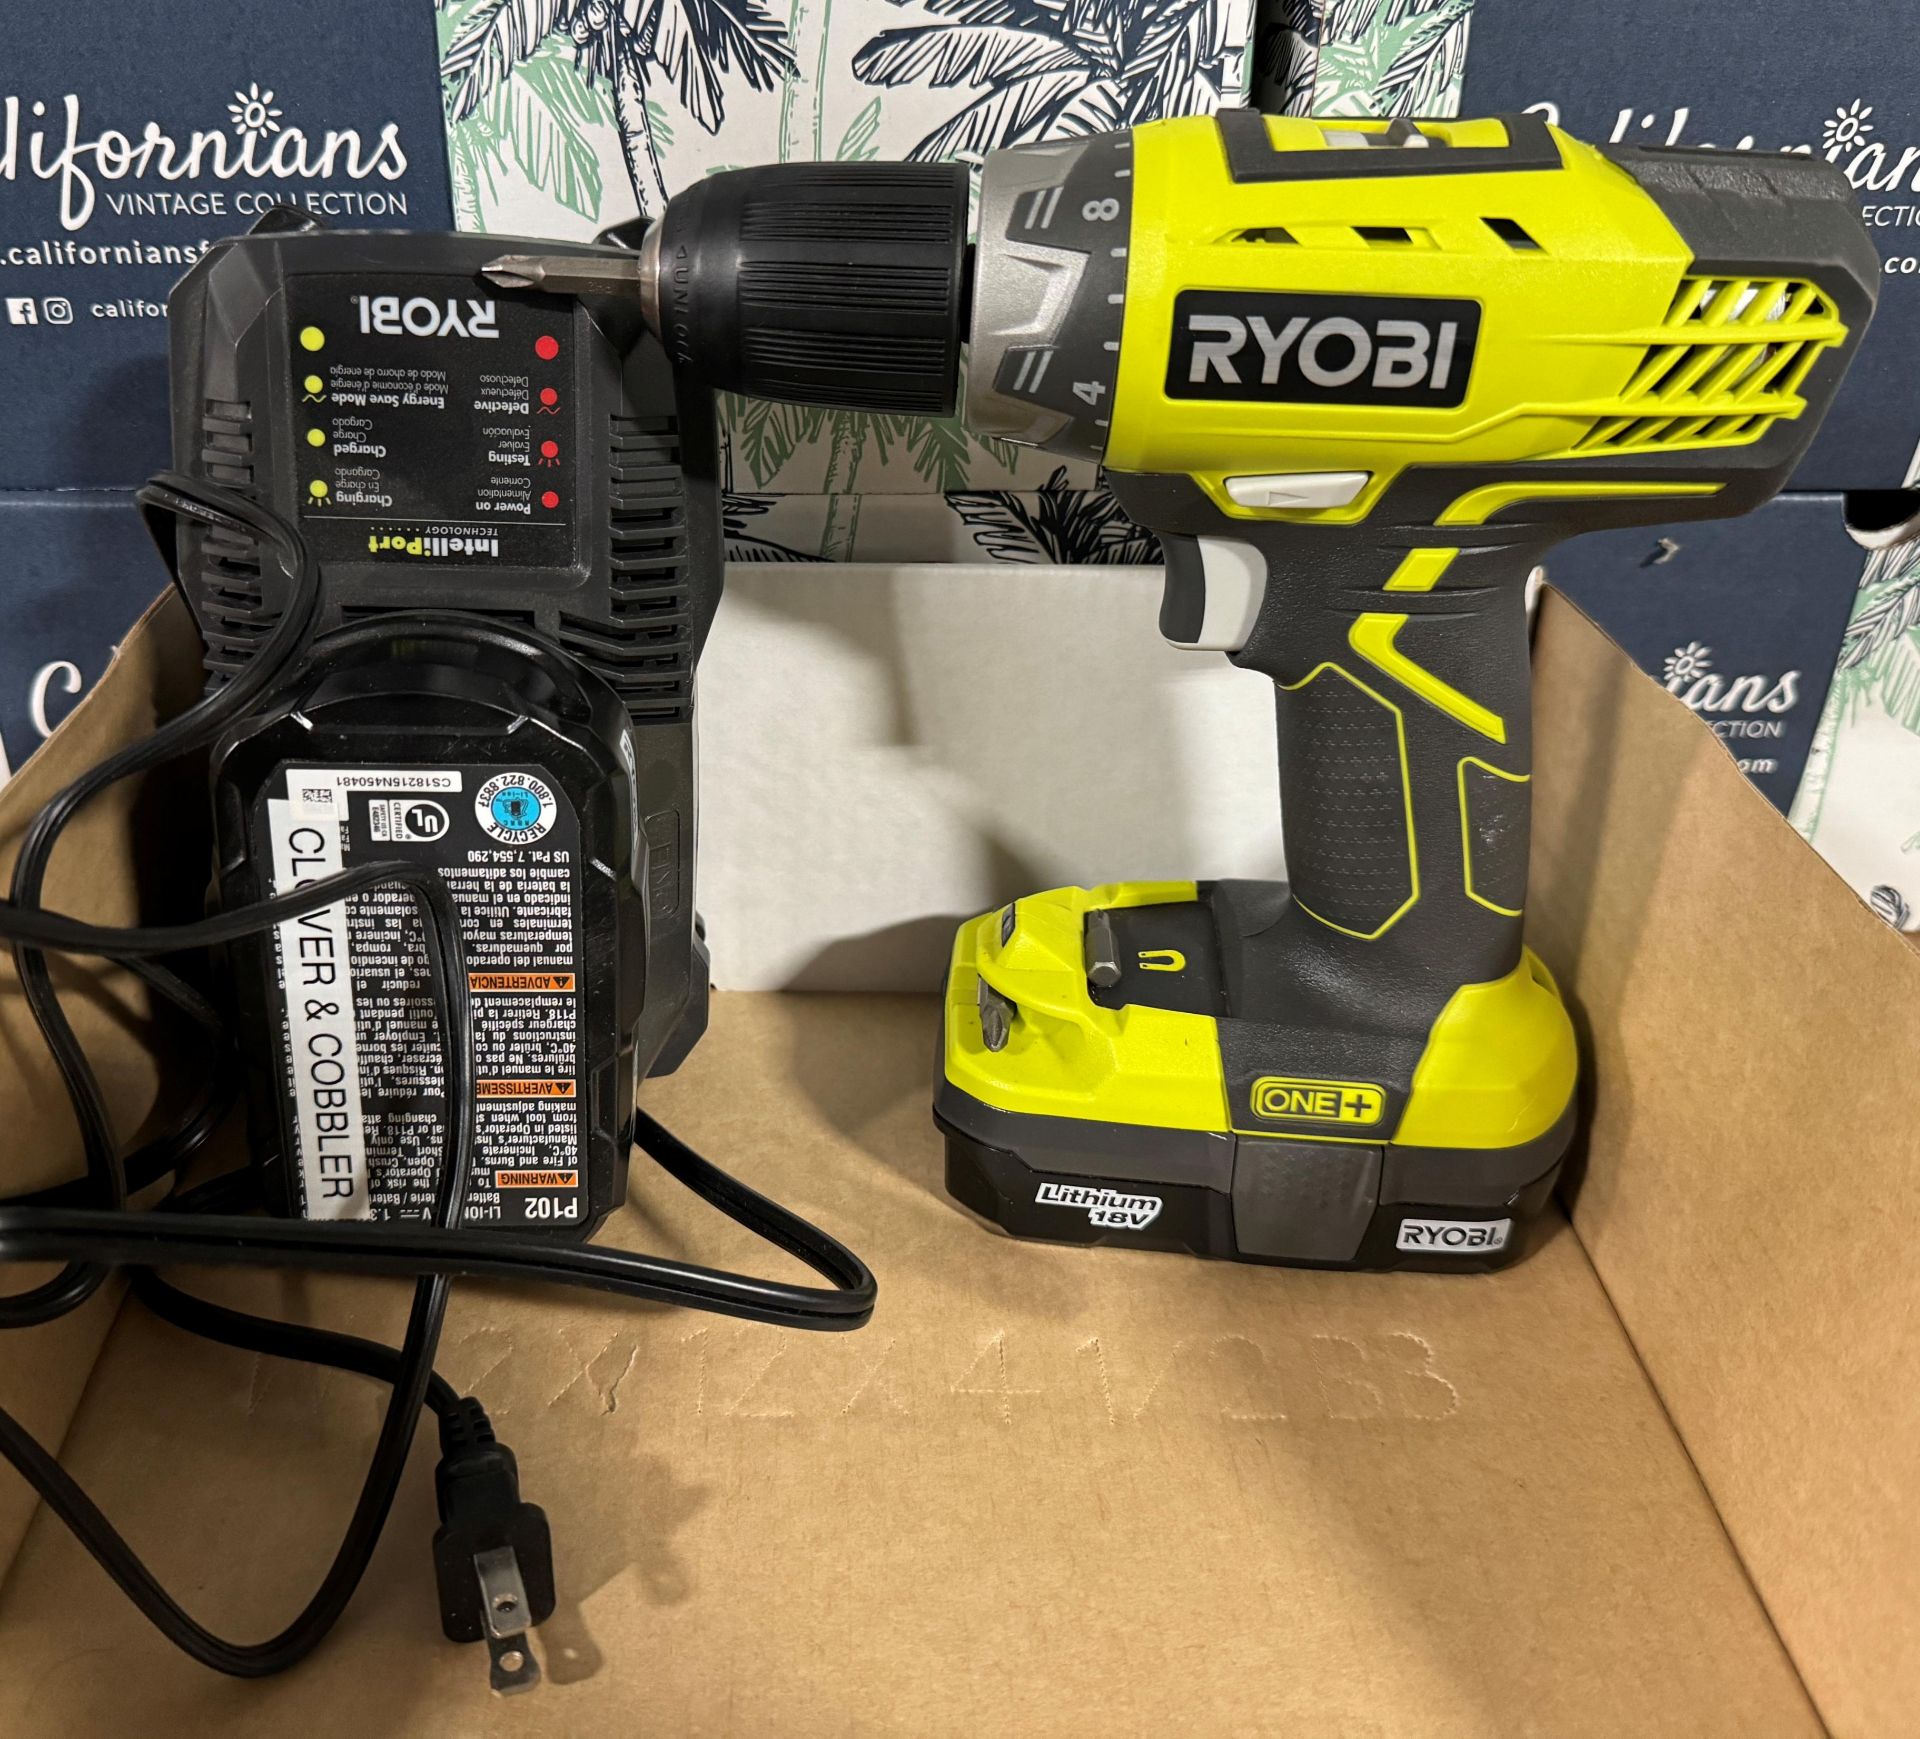 LOT - (1) RYOBI ELECTRIC DRILL W/ CHARGER AND EXTRA BATTERY, AND (1) 39-PIECE TOOL KIT